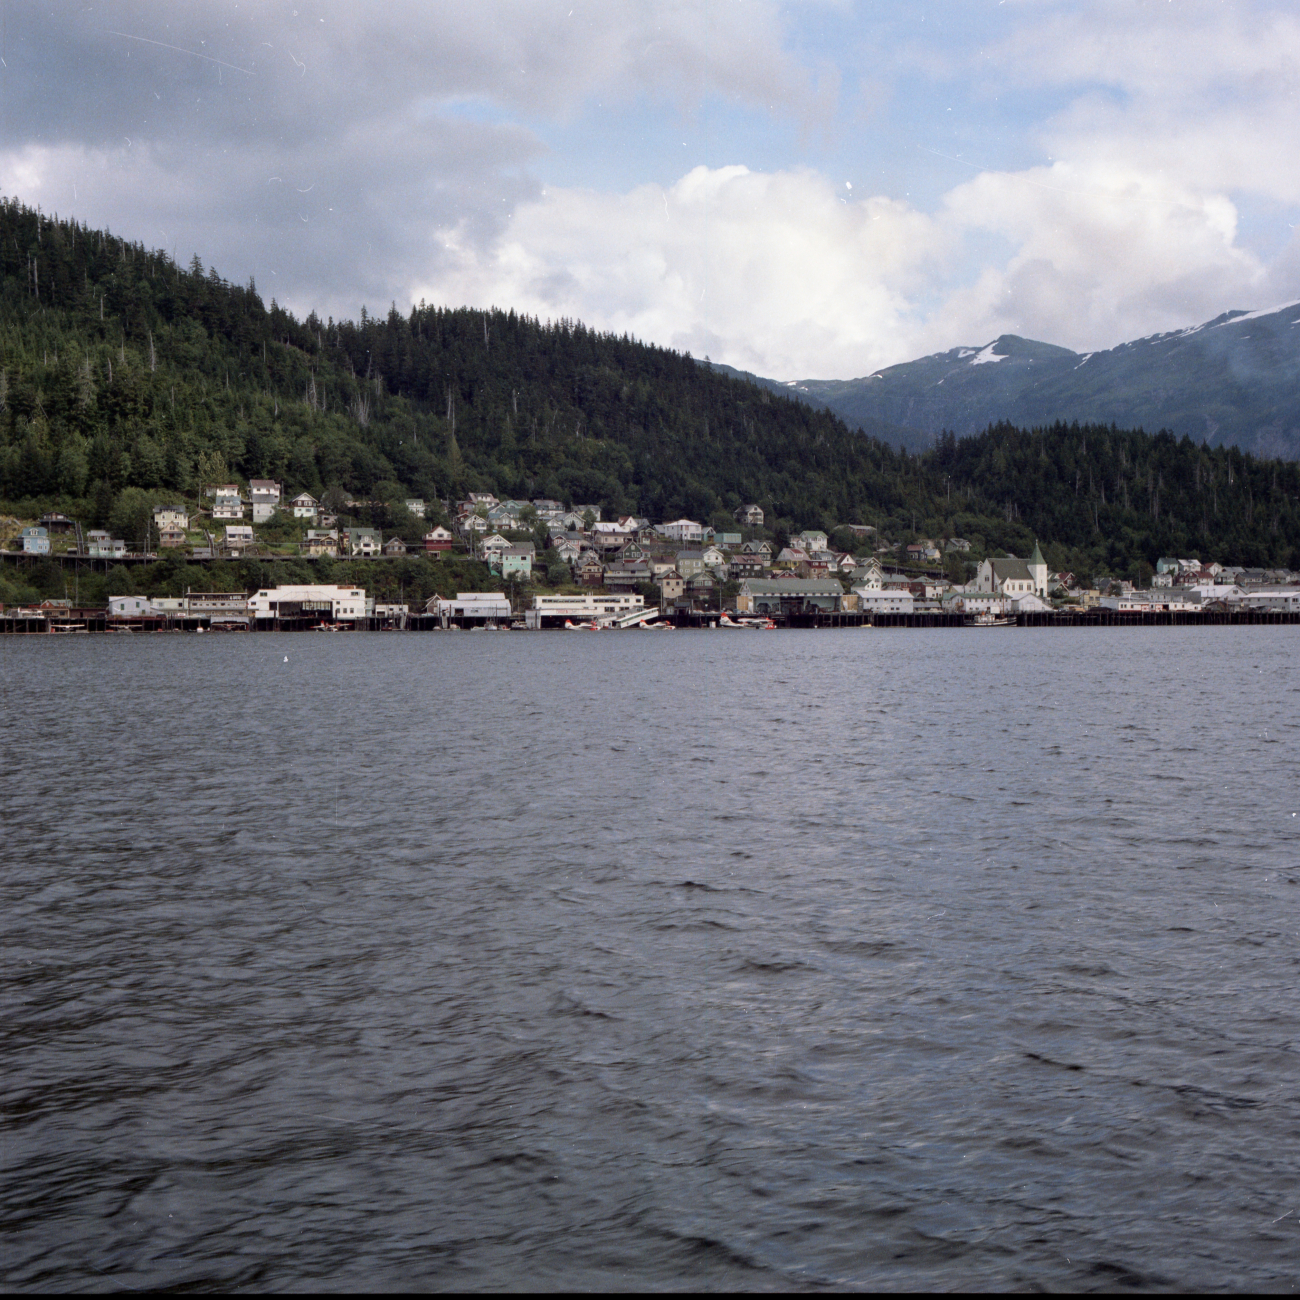 A view of Ketchikan